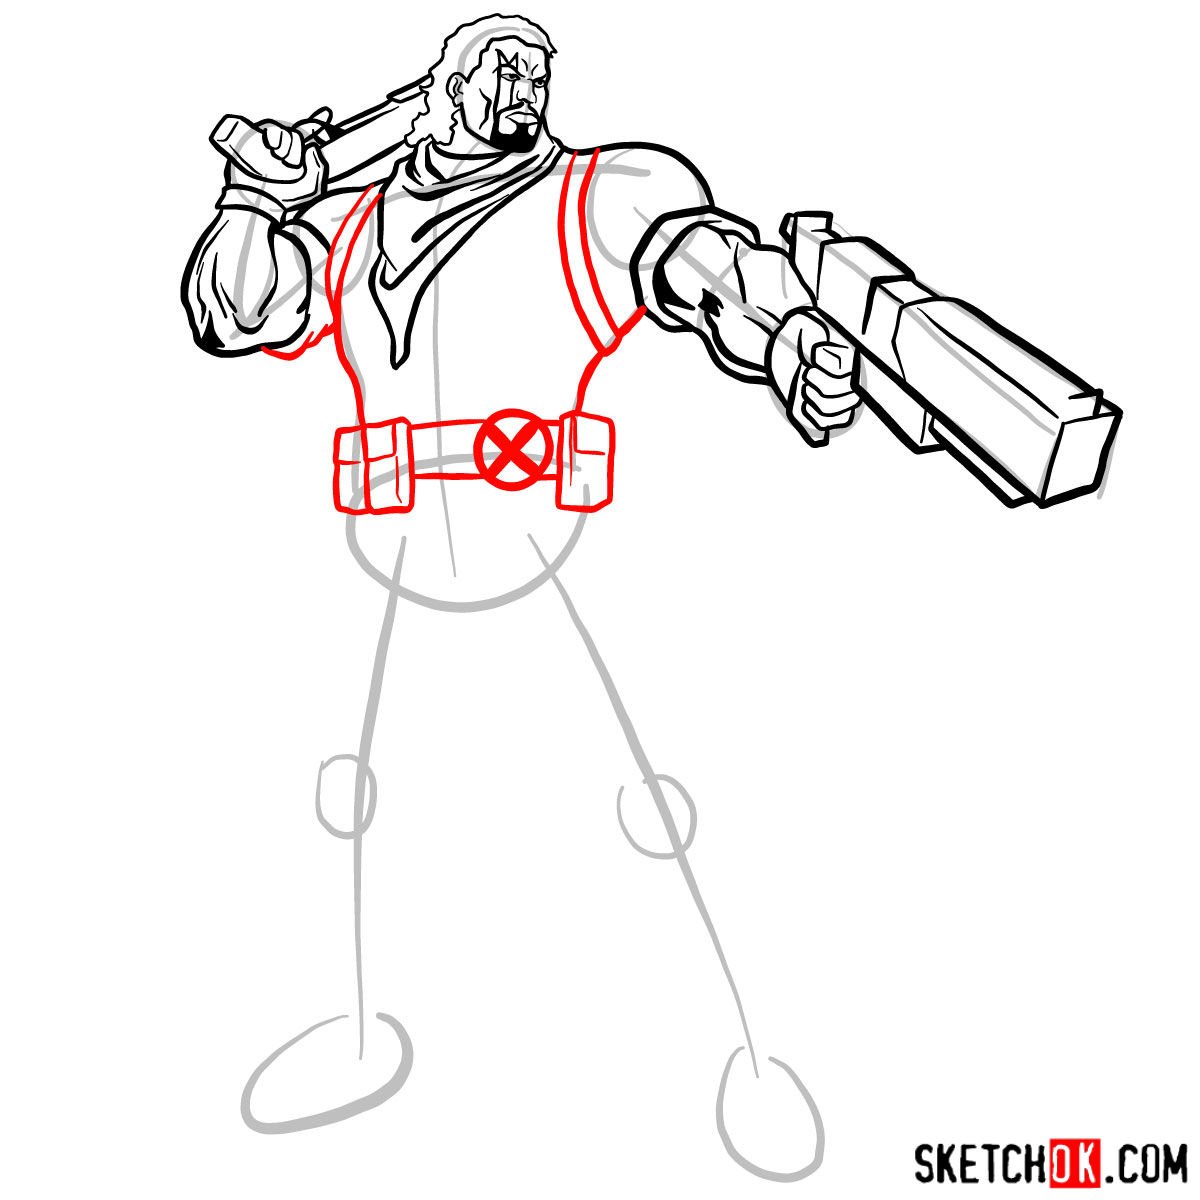 How to draw Lucas Bishop, a mutant from X-Men series - step 11